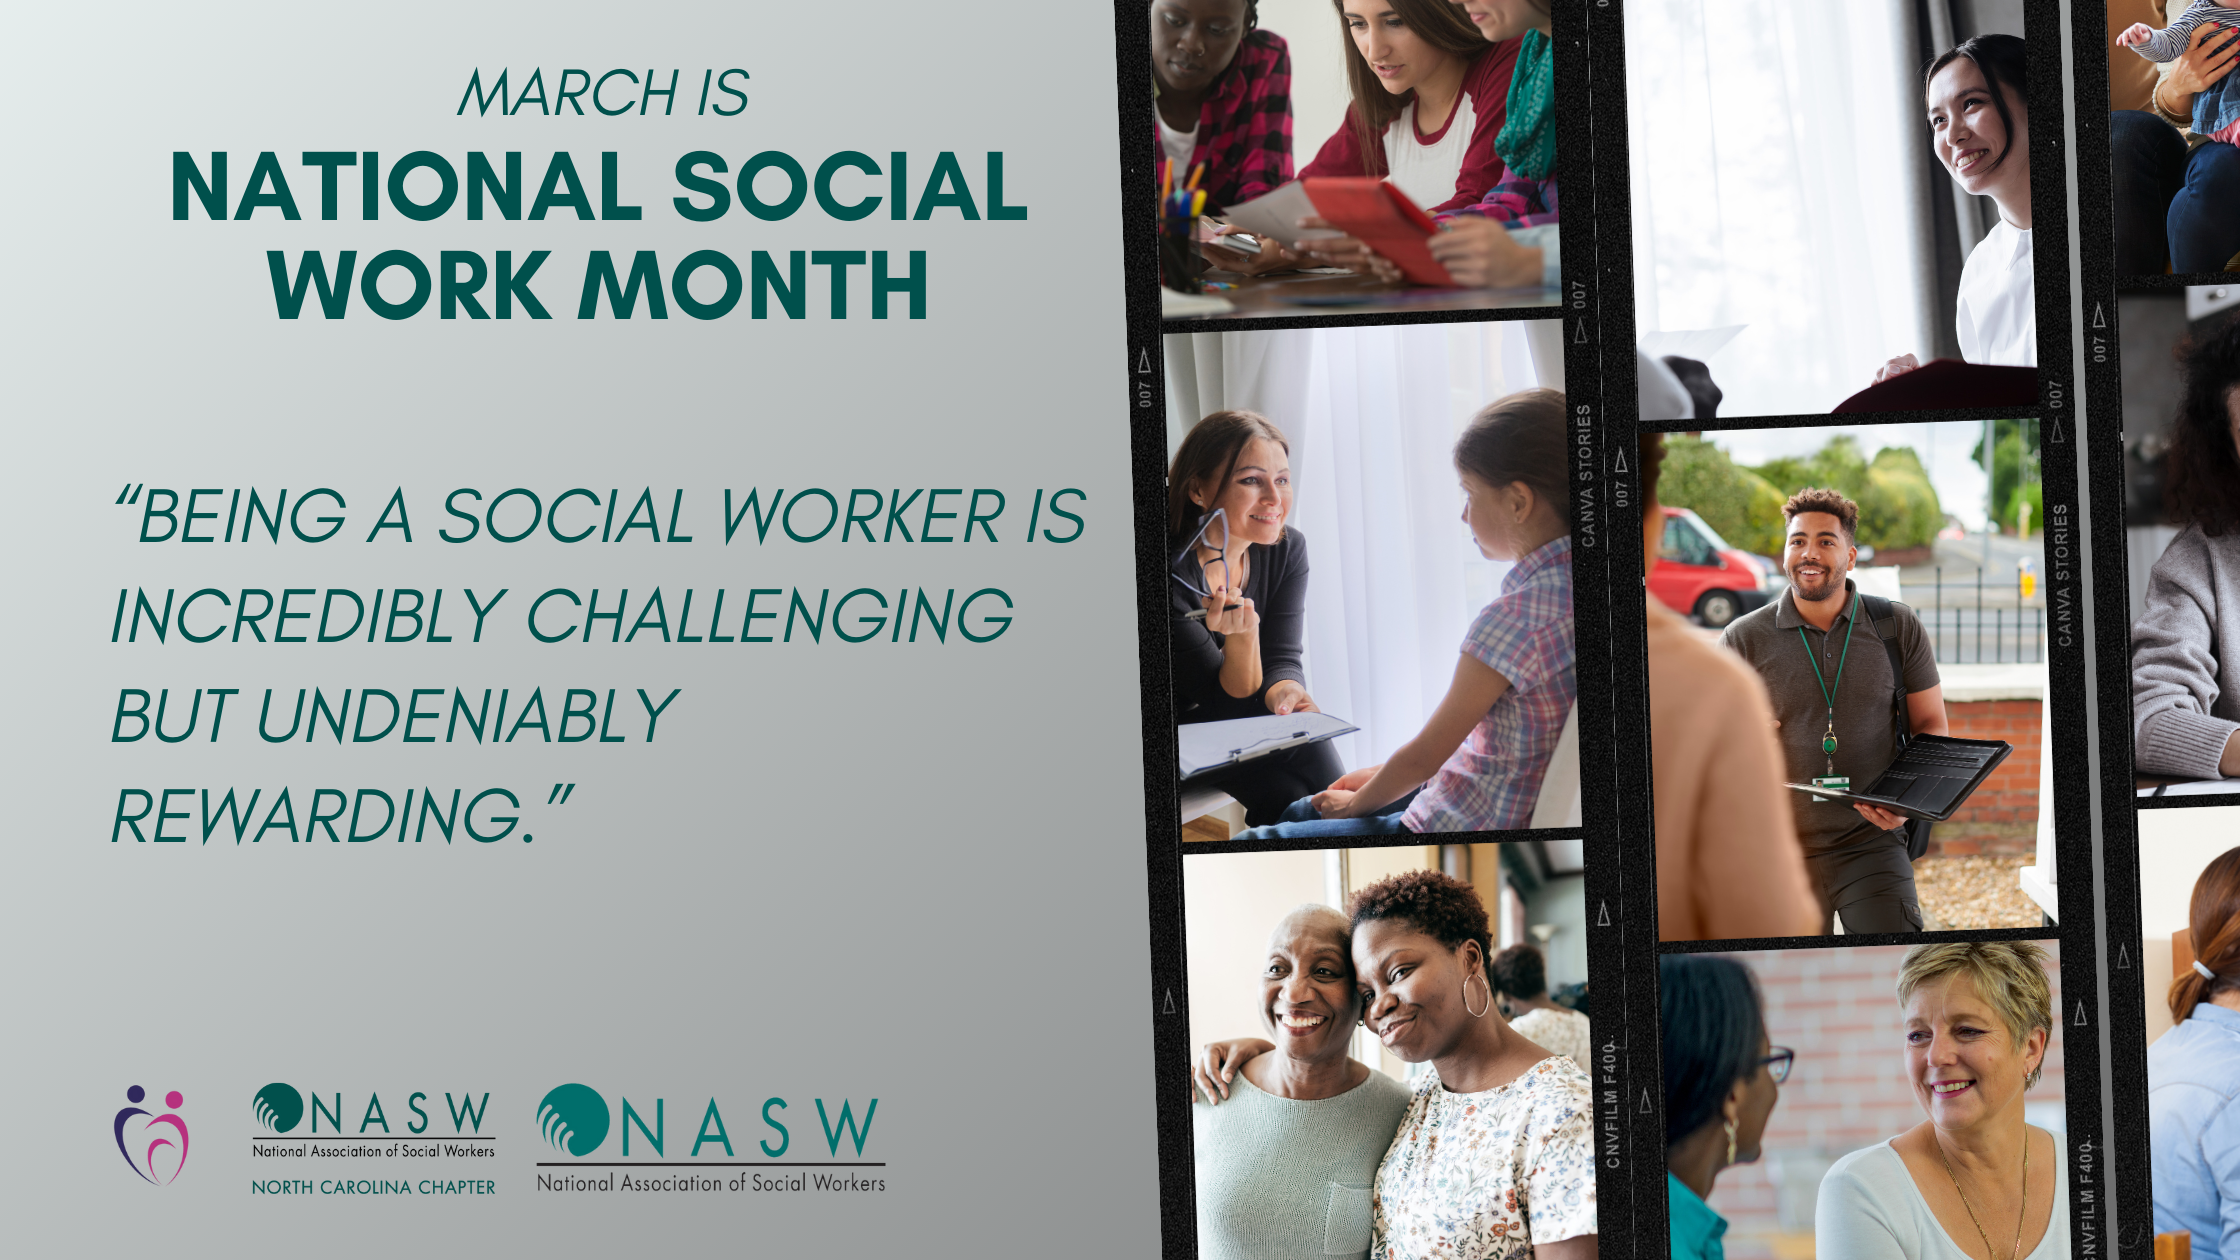 March is national social work month.